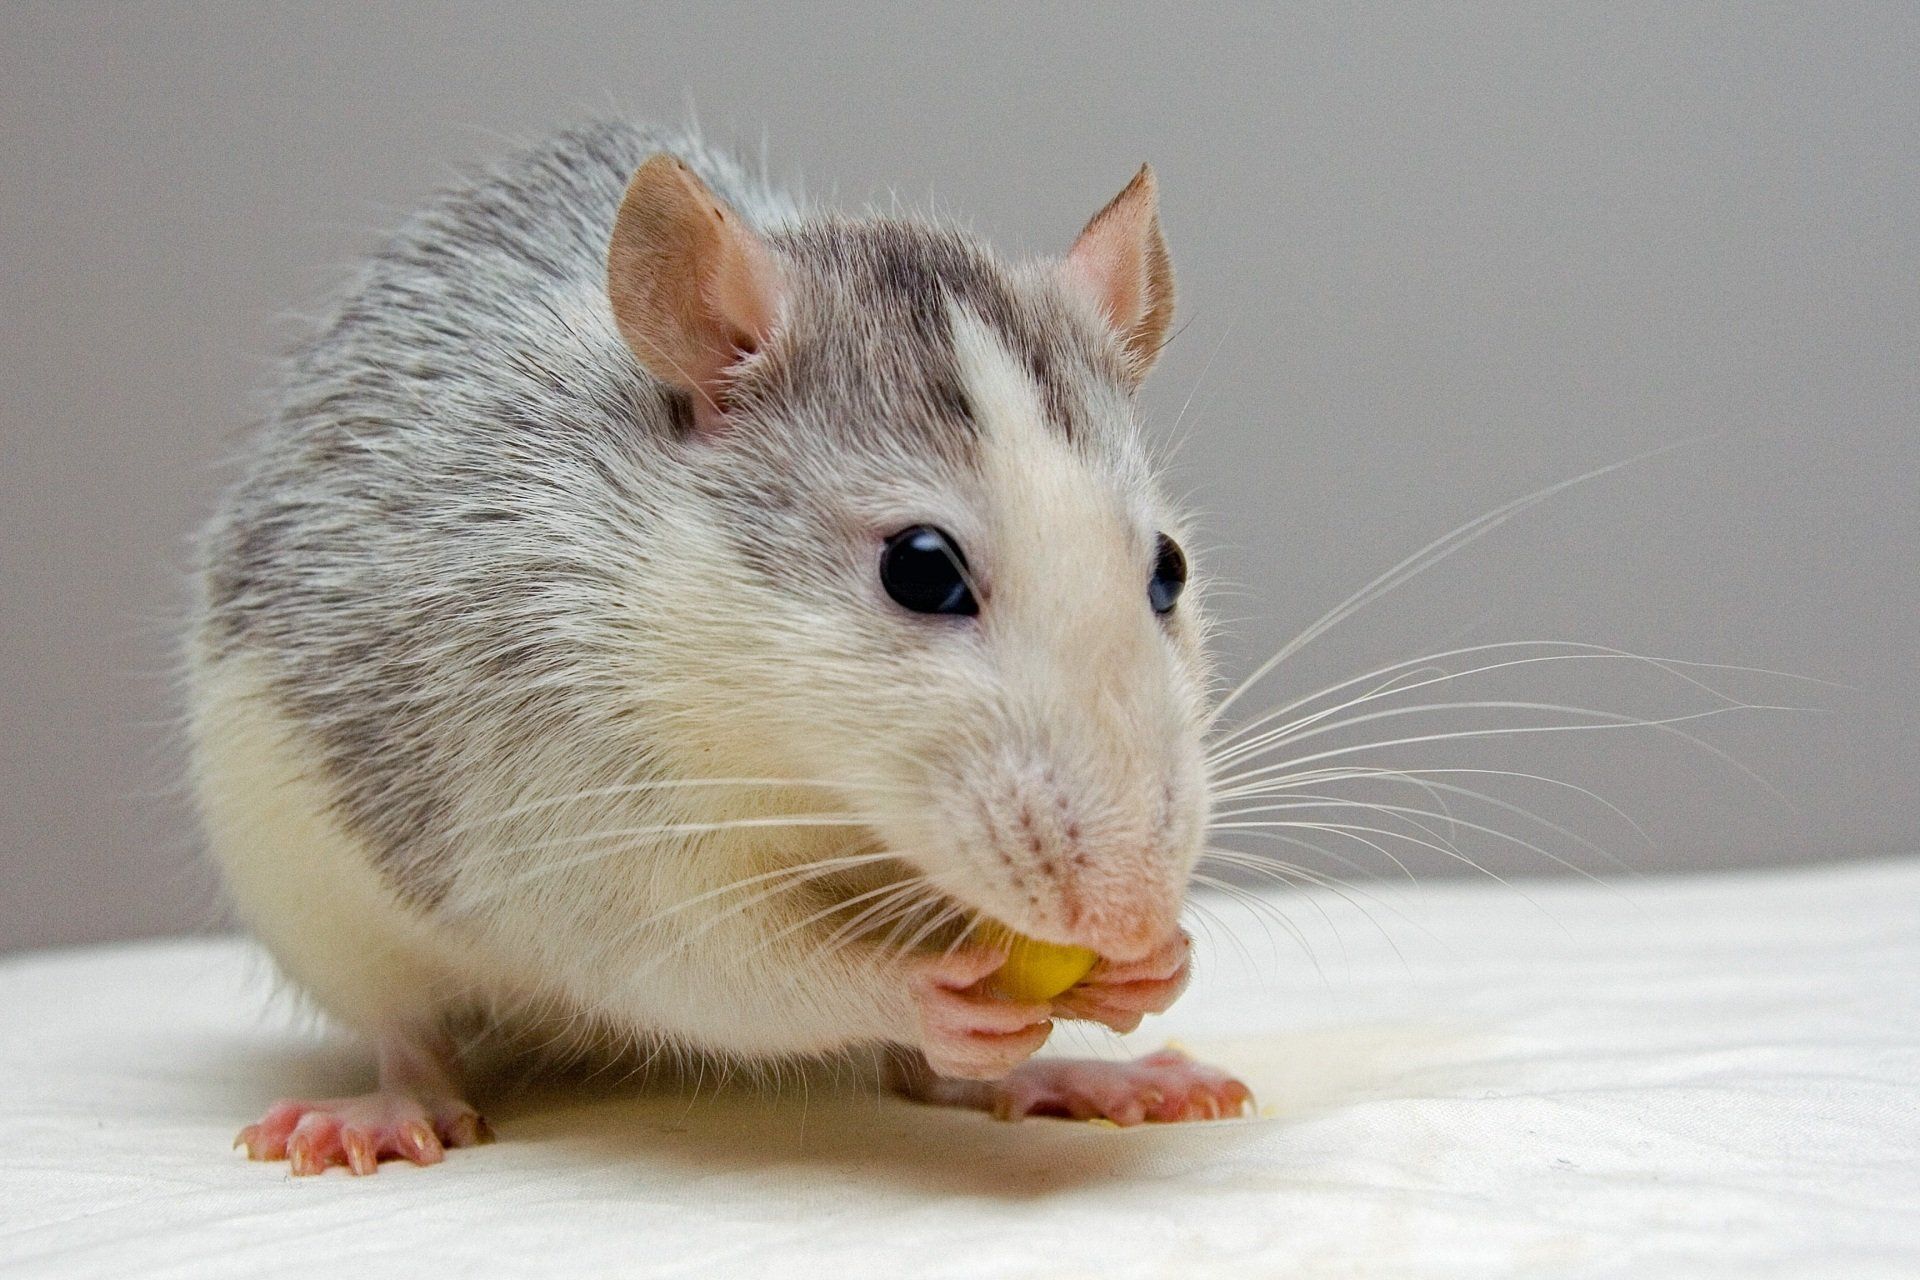 A close-up of a rat eating a piece of food.